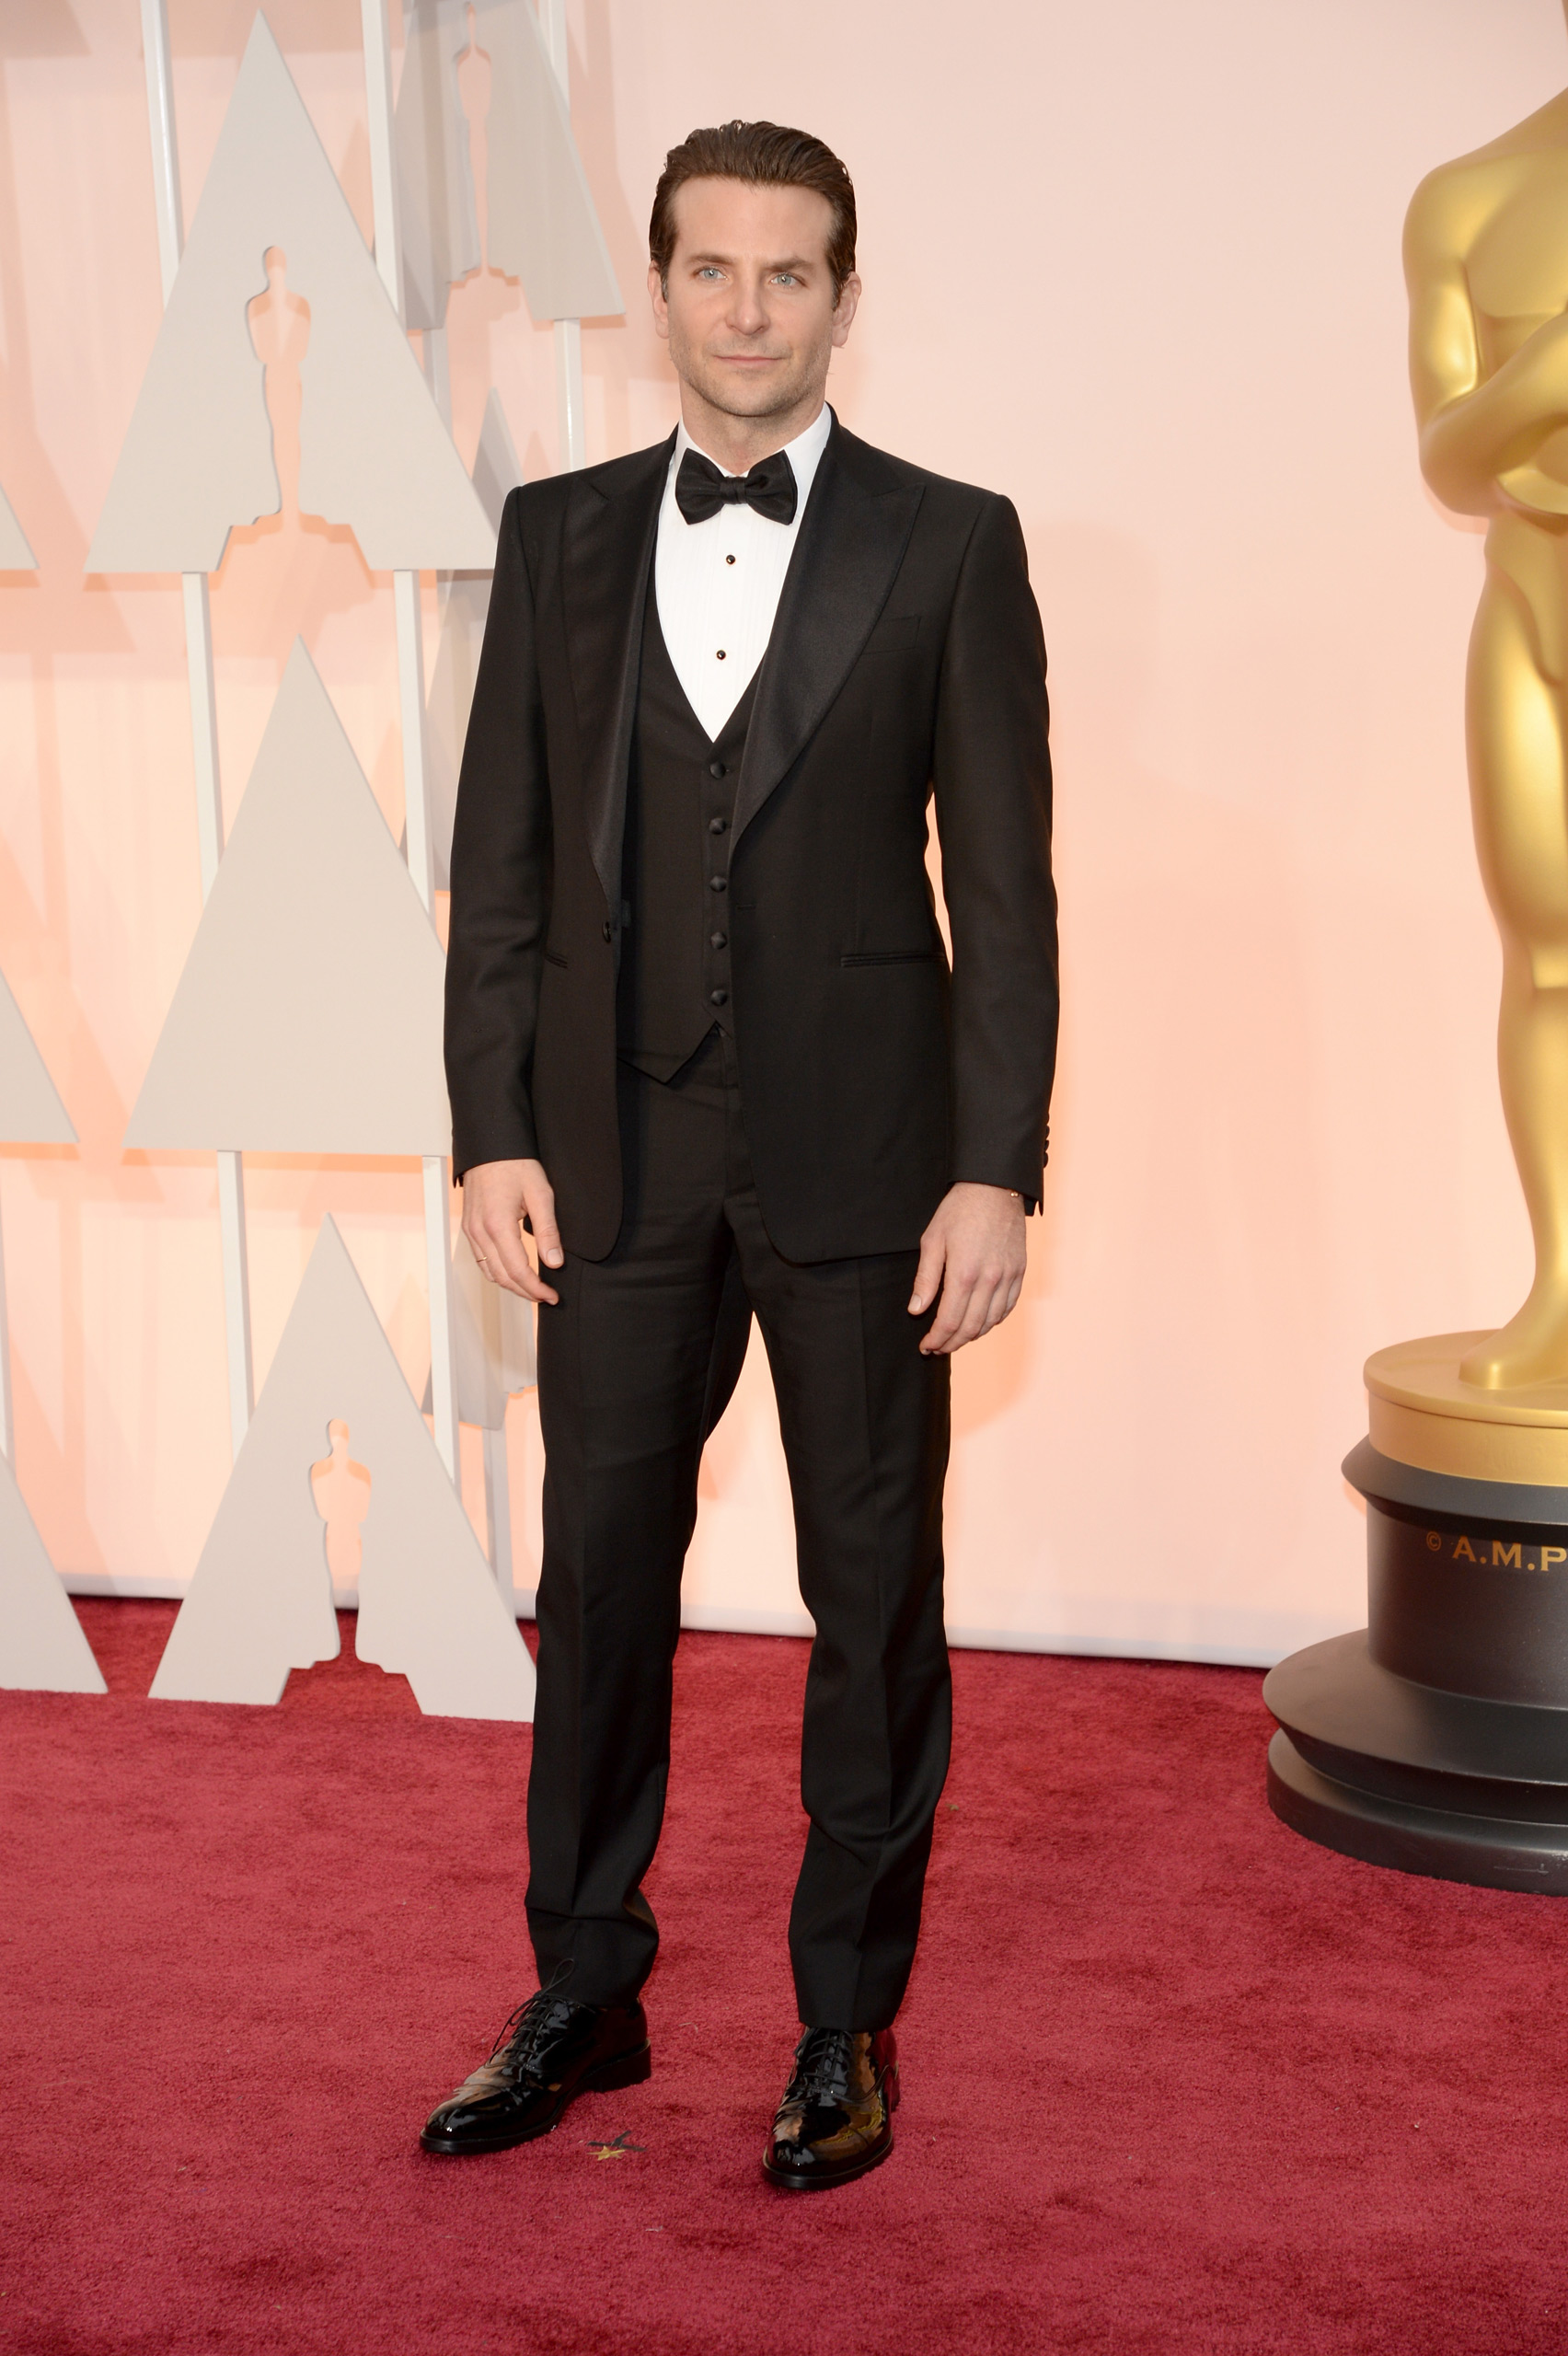 Bradley Cooper attends the 87th Annual Academy Awards on Feb. 22, 2015 in Hollywood, Calif.